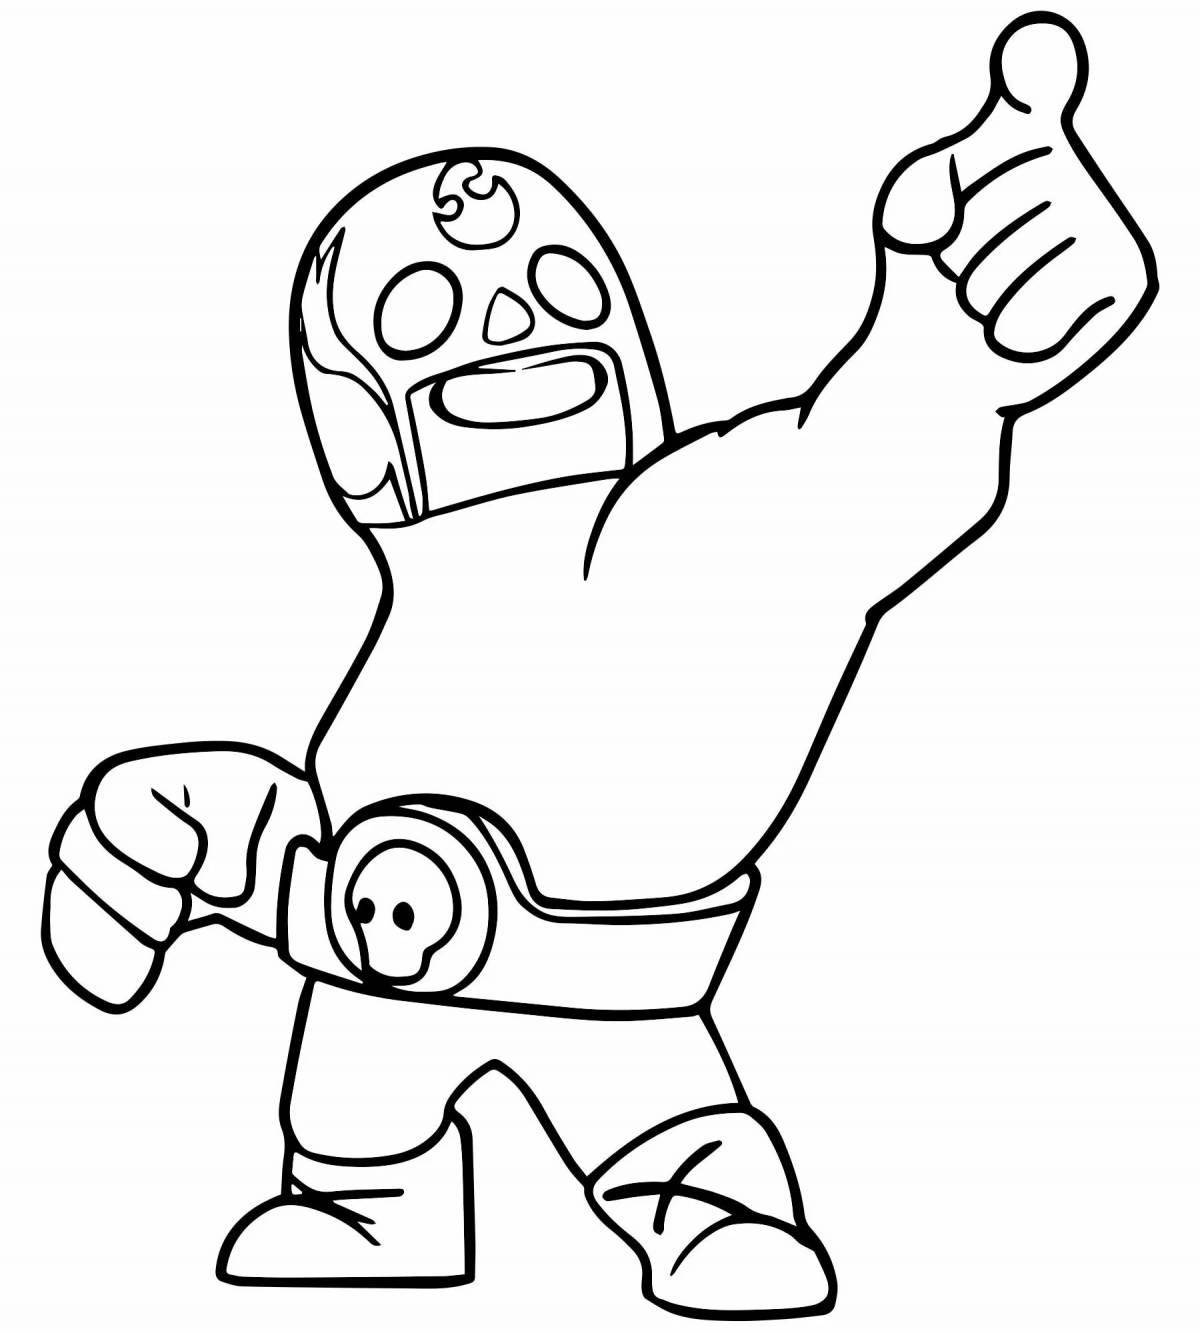 Adorable Fighter Icons Coloring Page